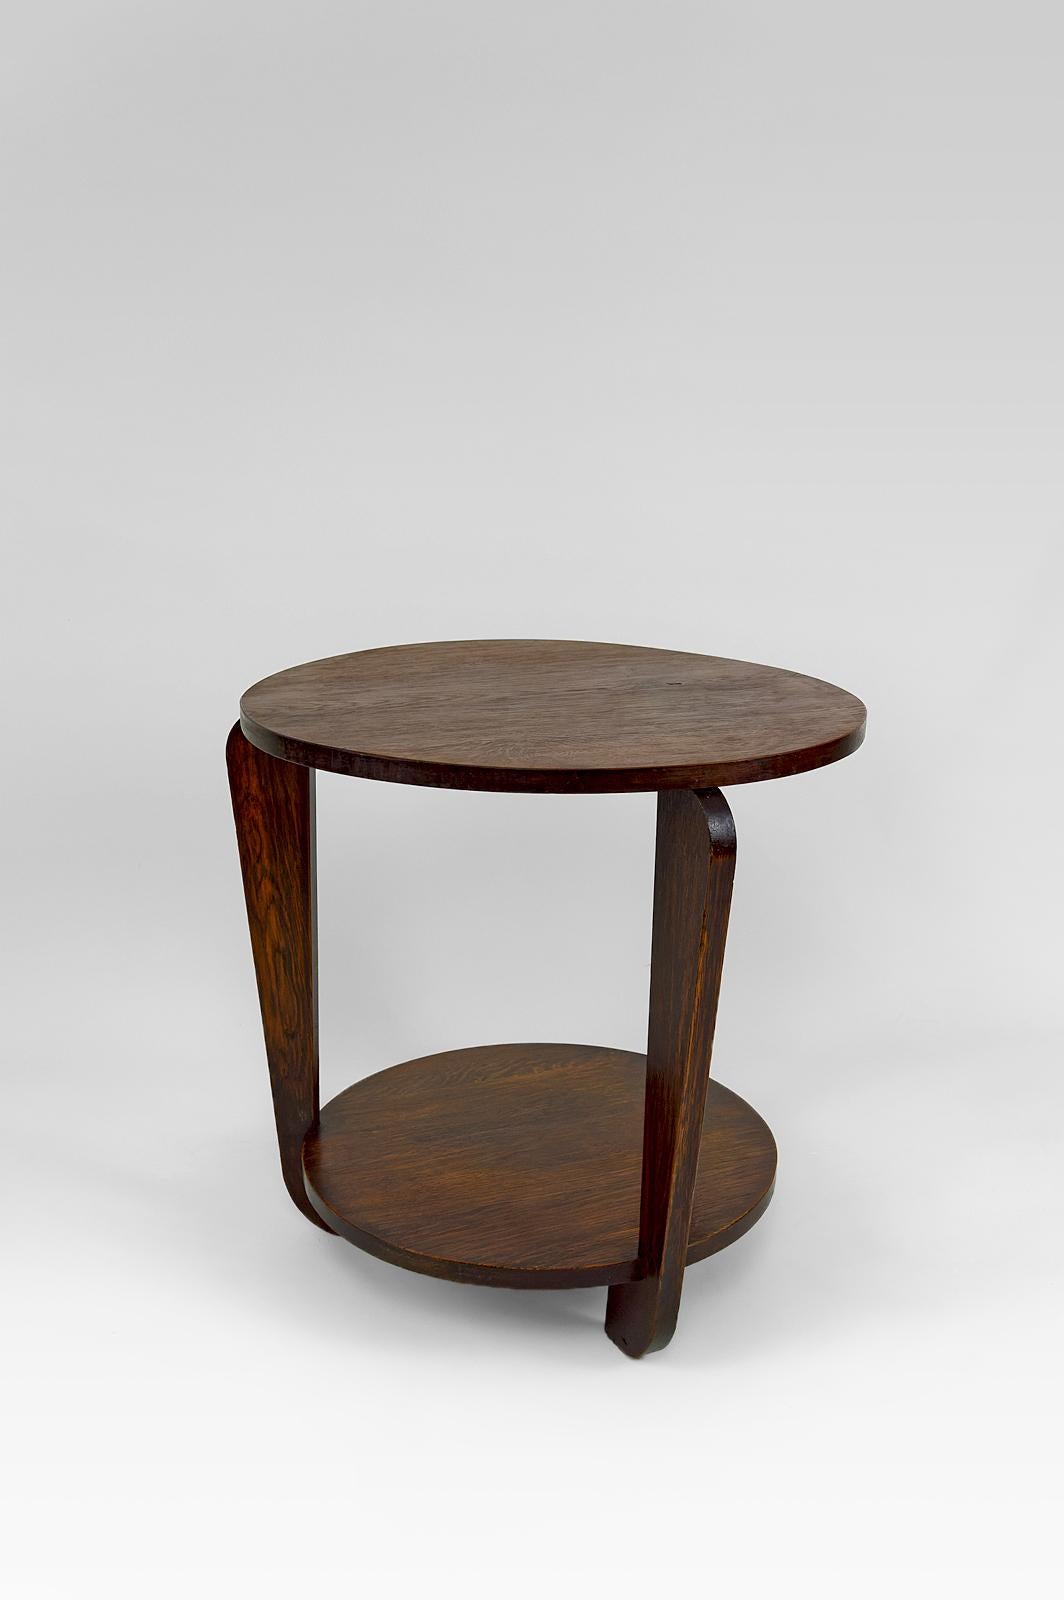 Modernist Art Deco round pedestal table in patinated oak, France, Circa 1930 For Sale 2